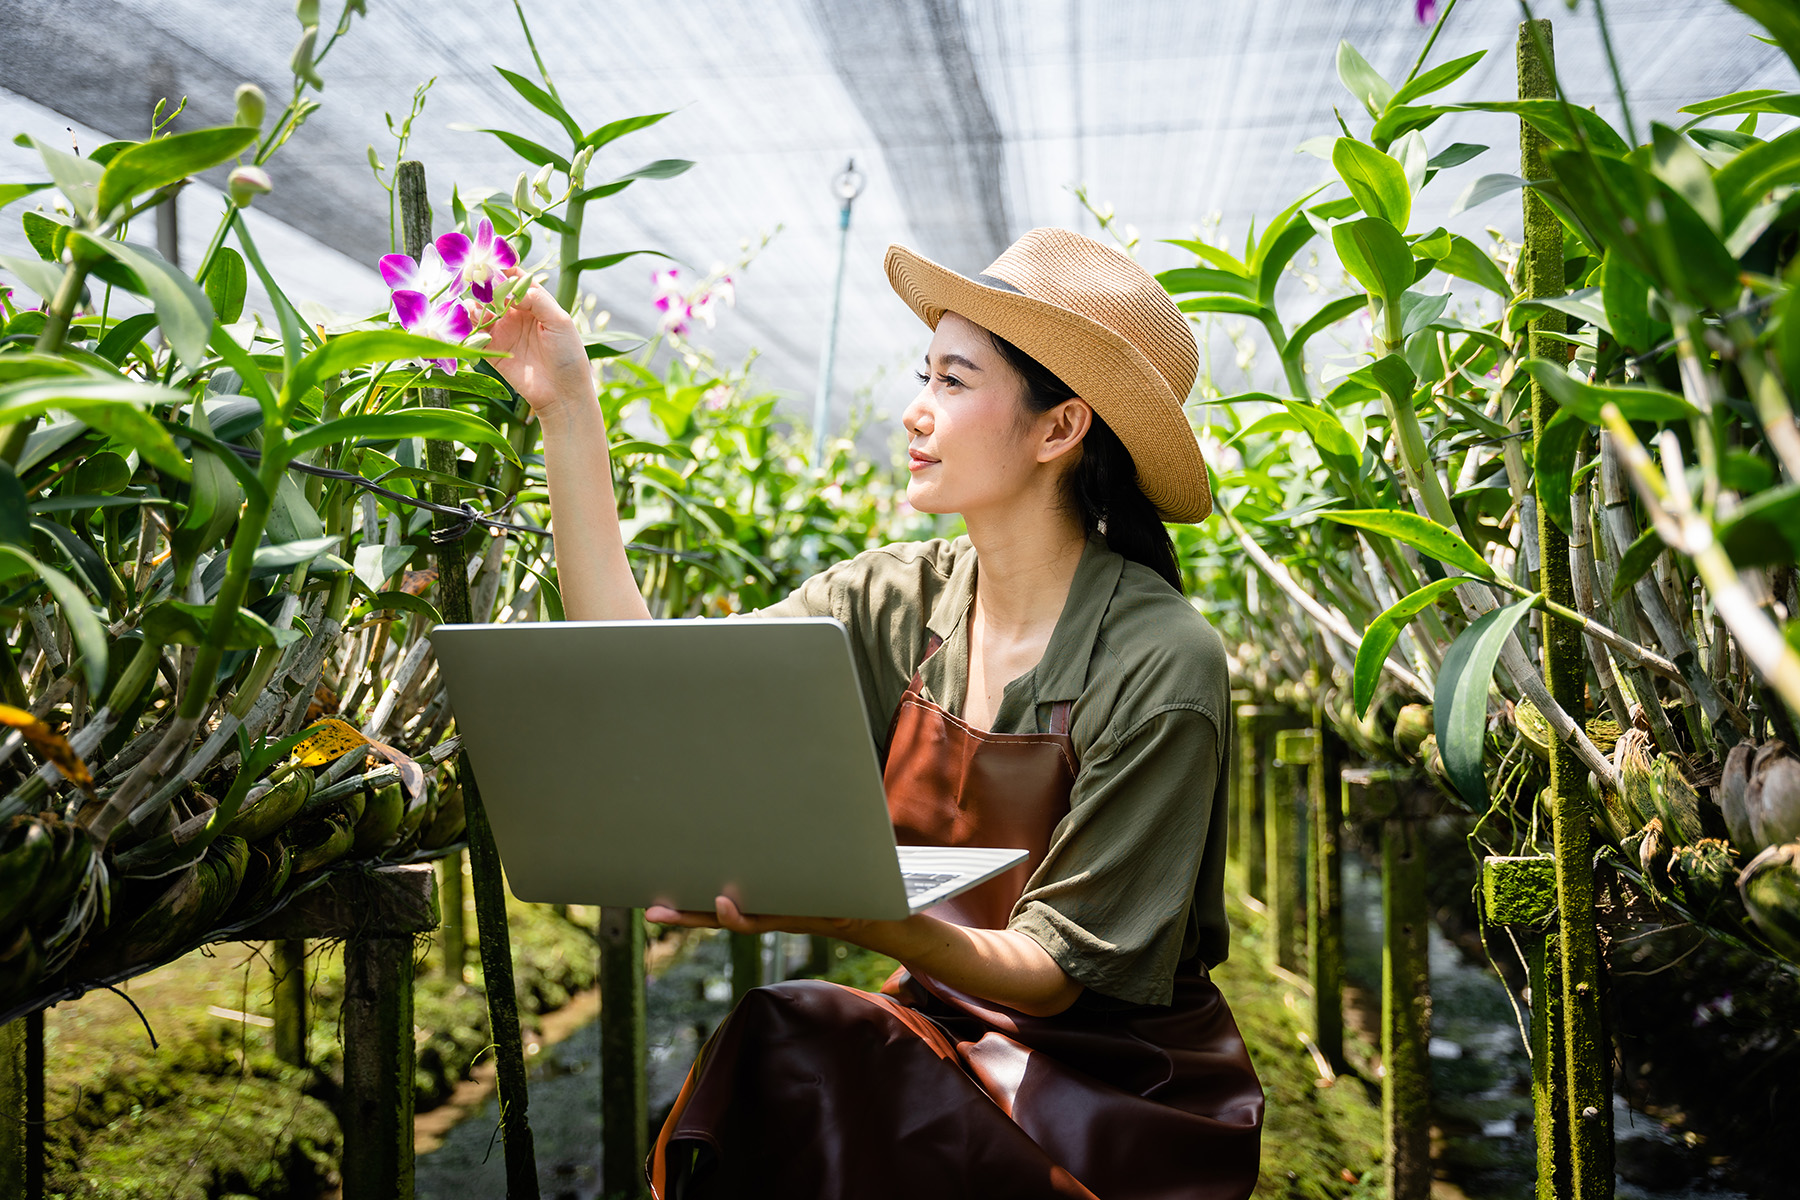 Worker checking plants in orchid nursery in Thailand

